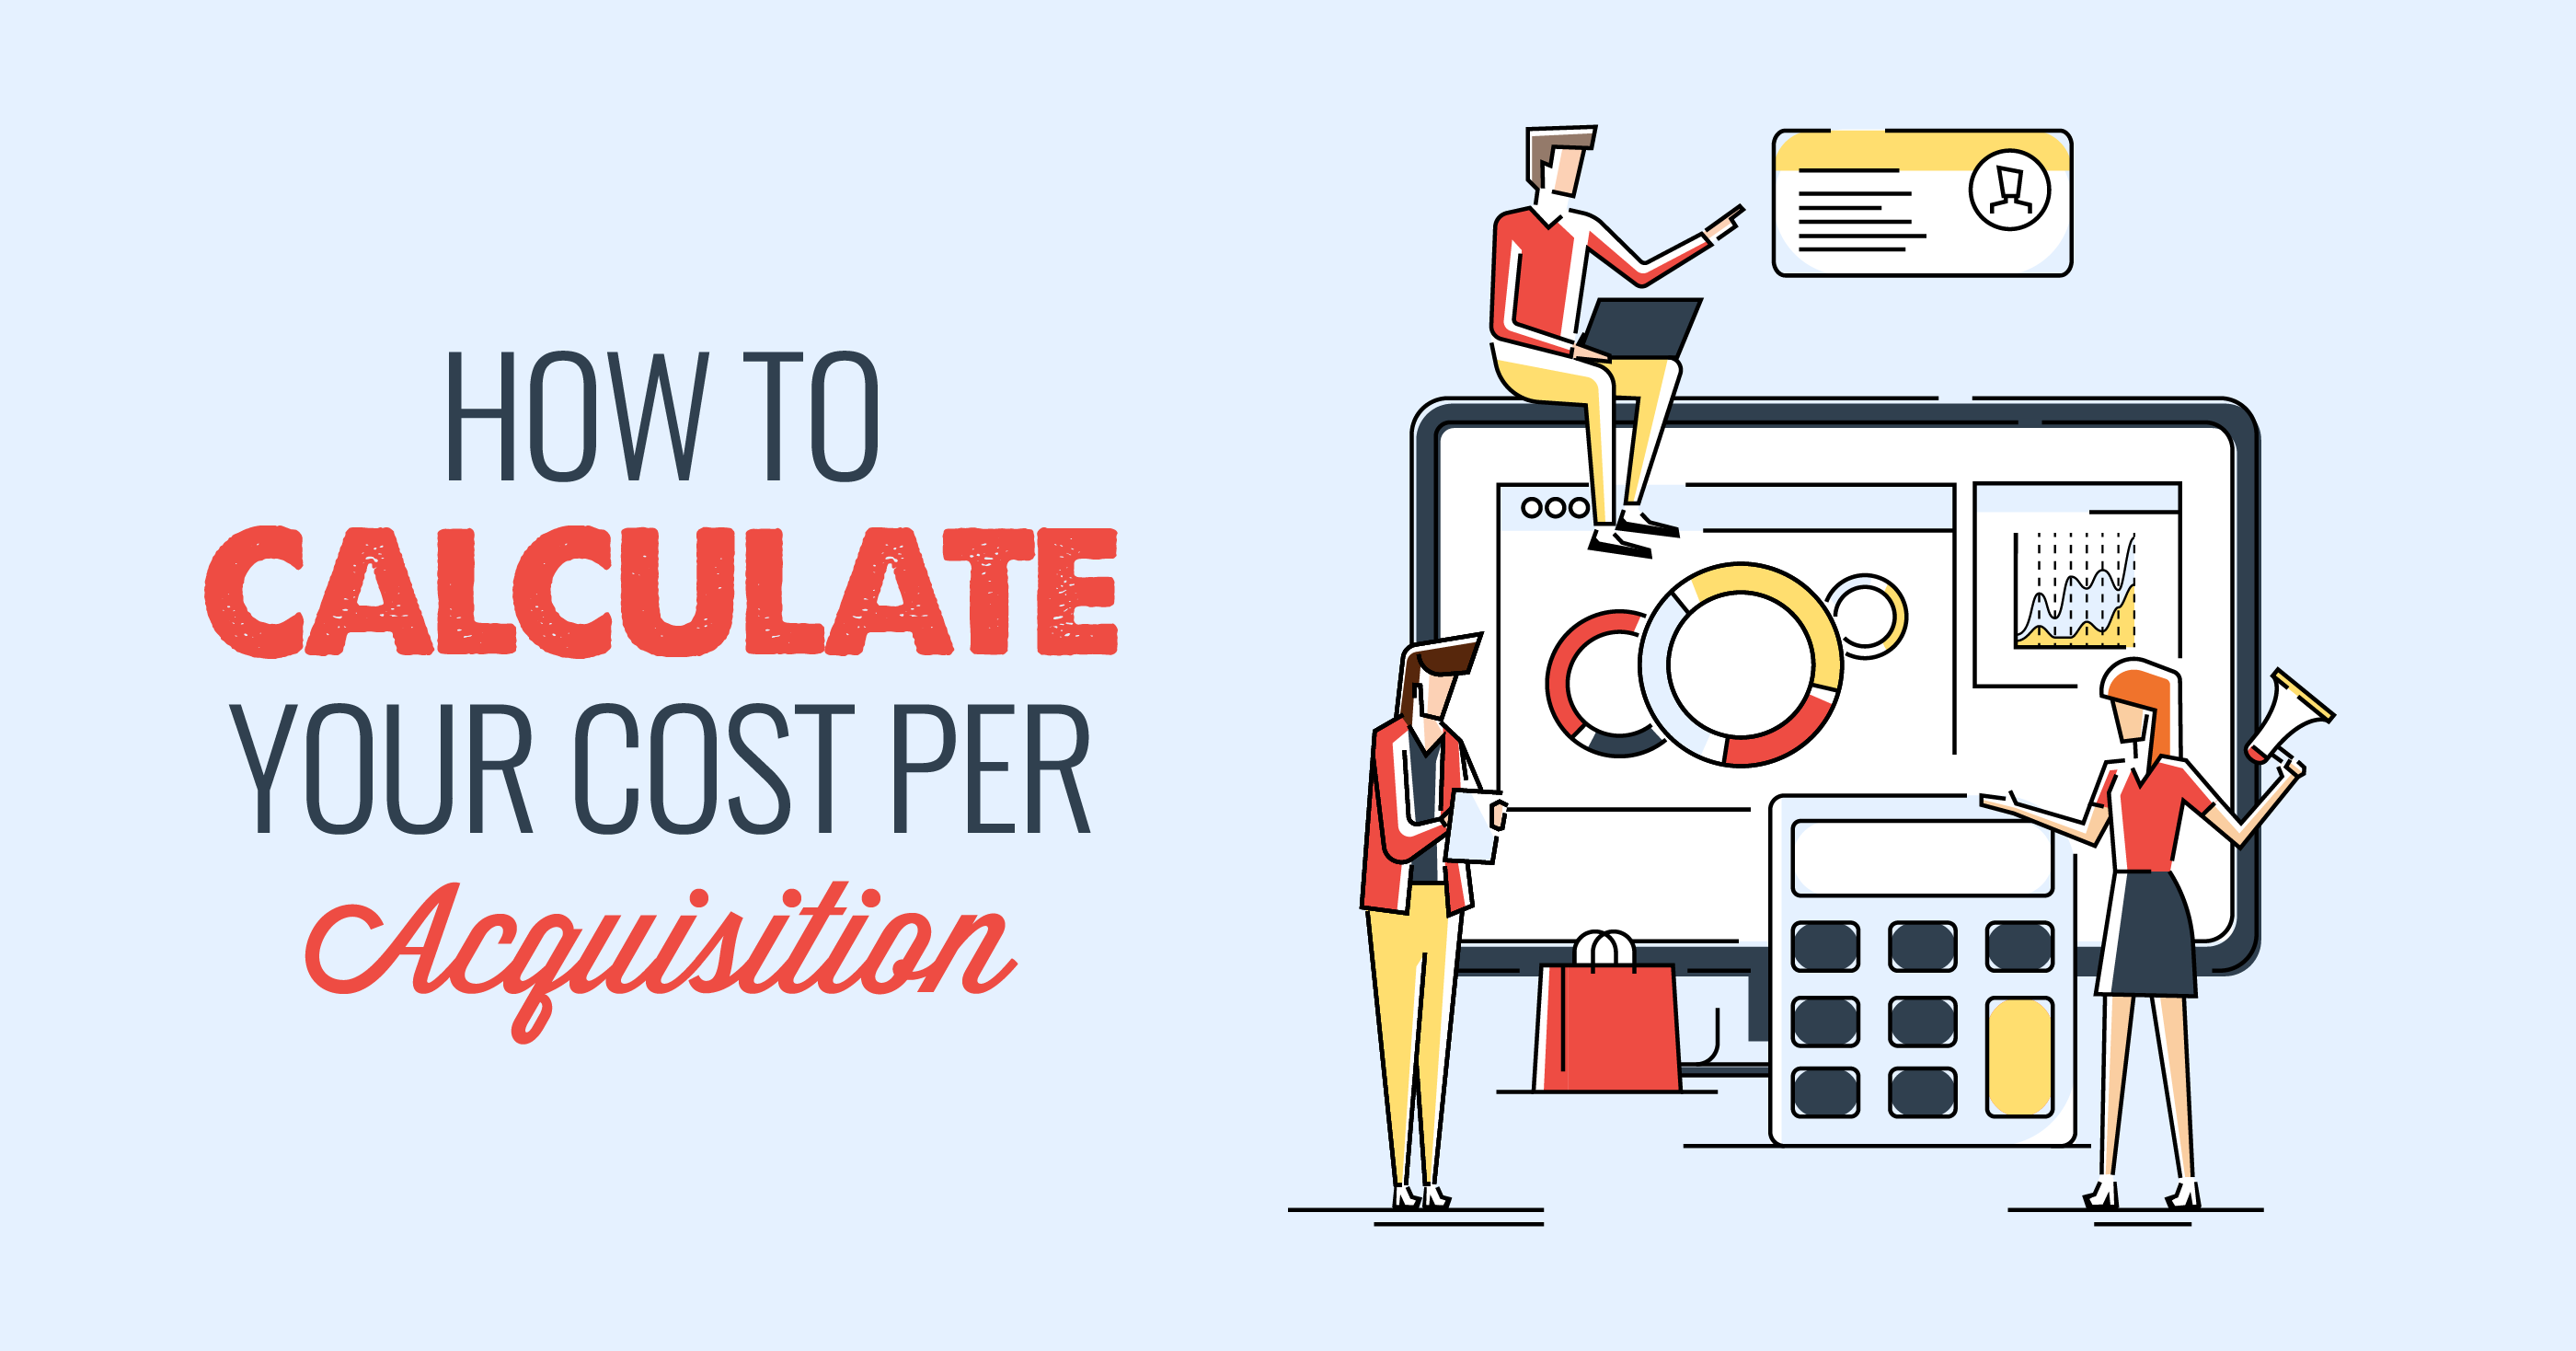 How to calculate your cost per acquisition